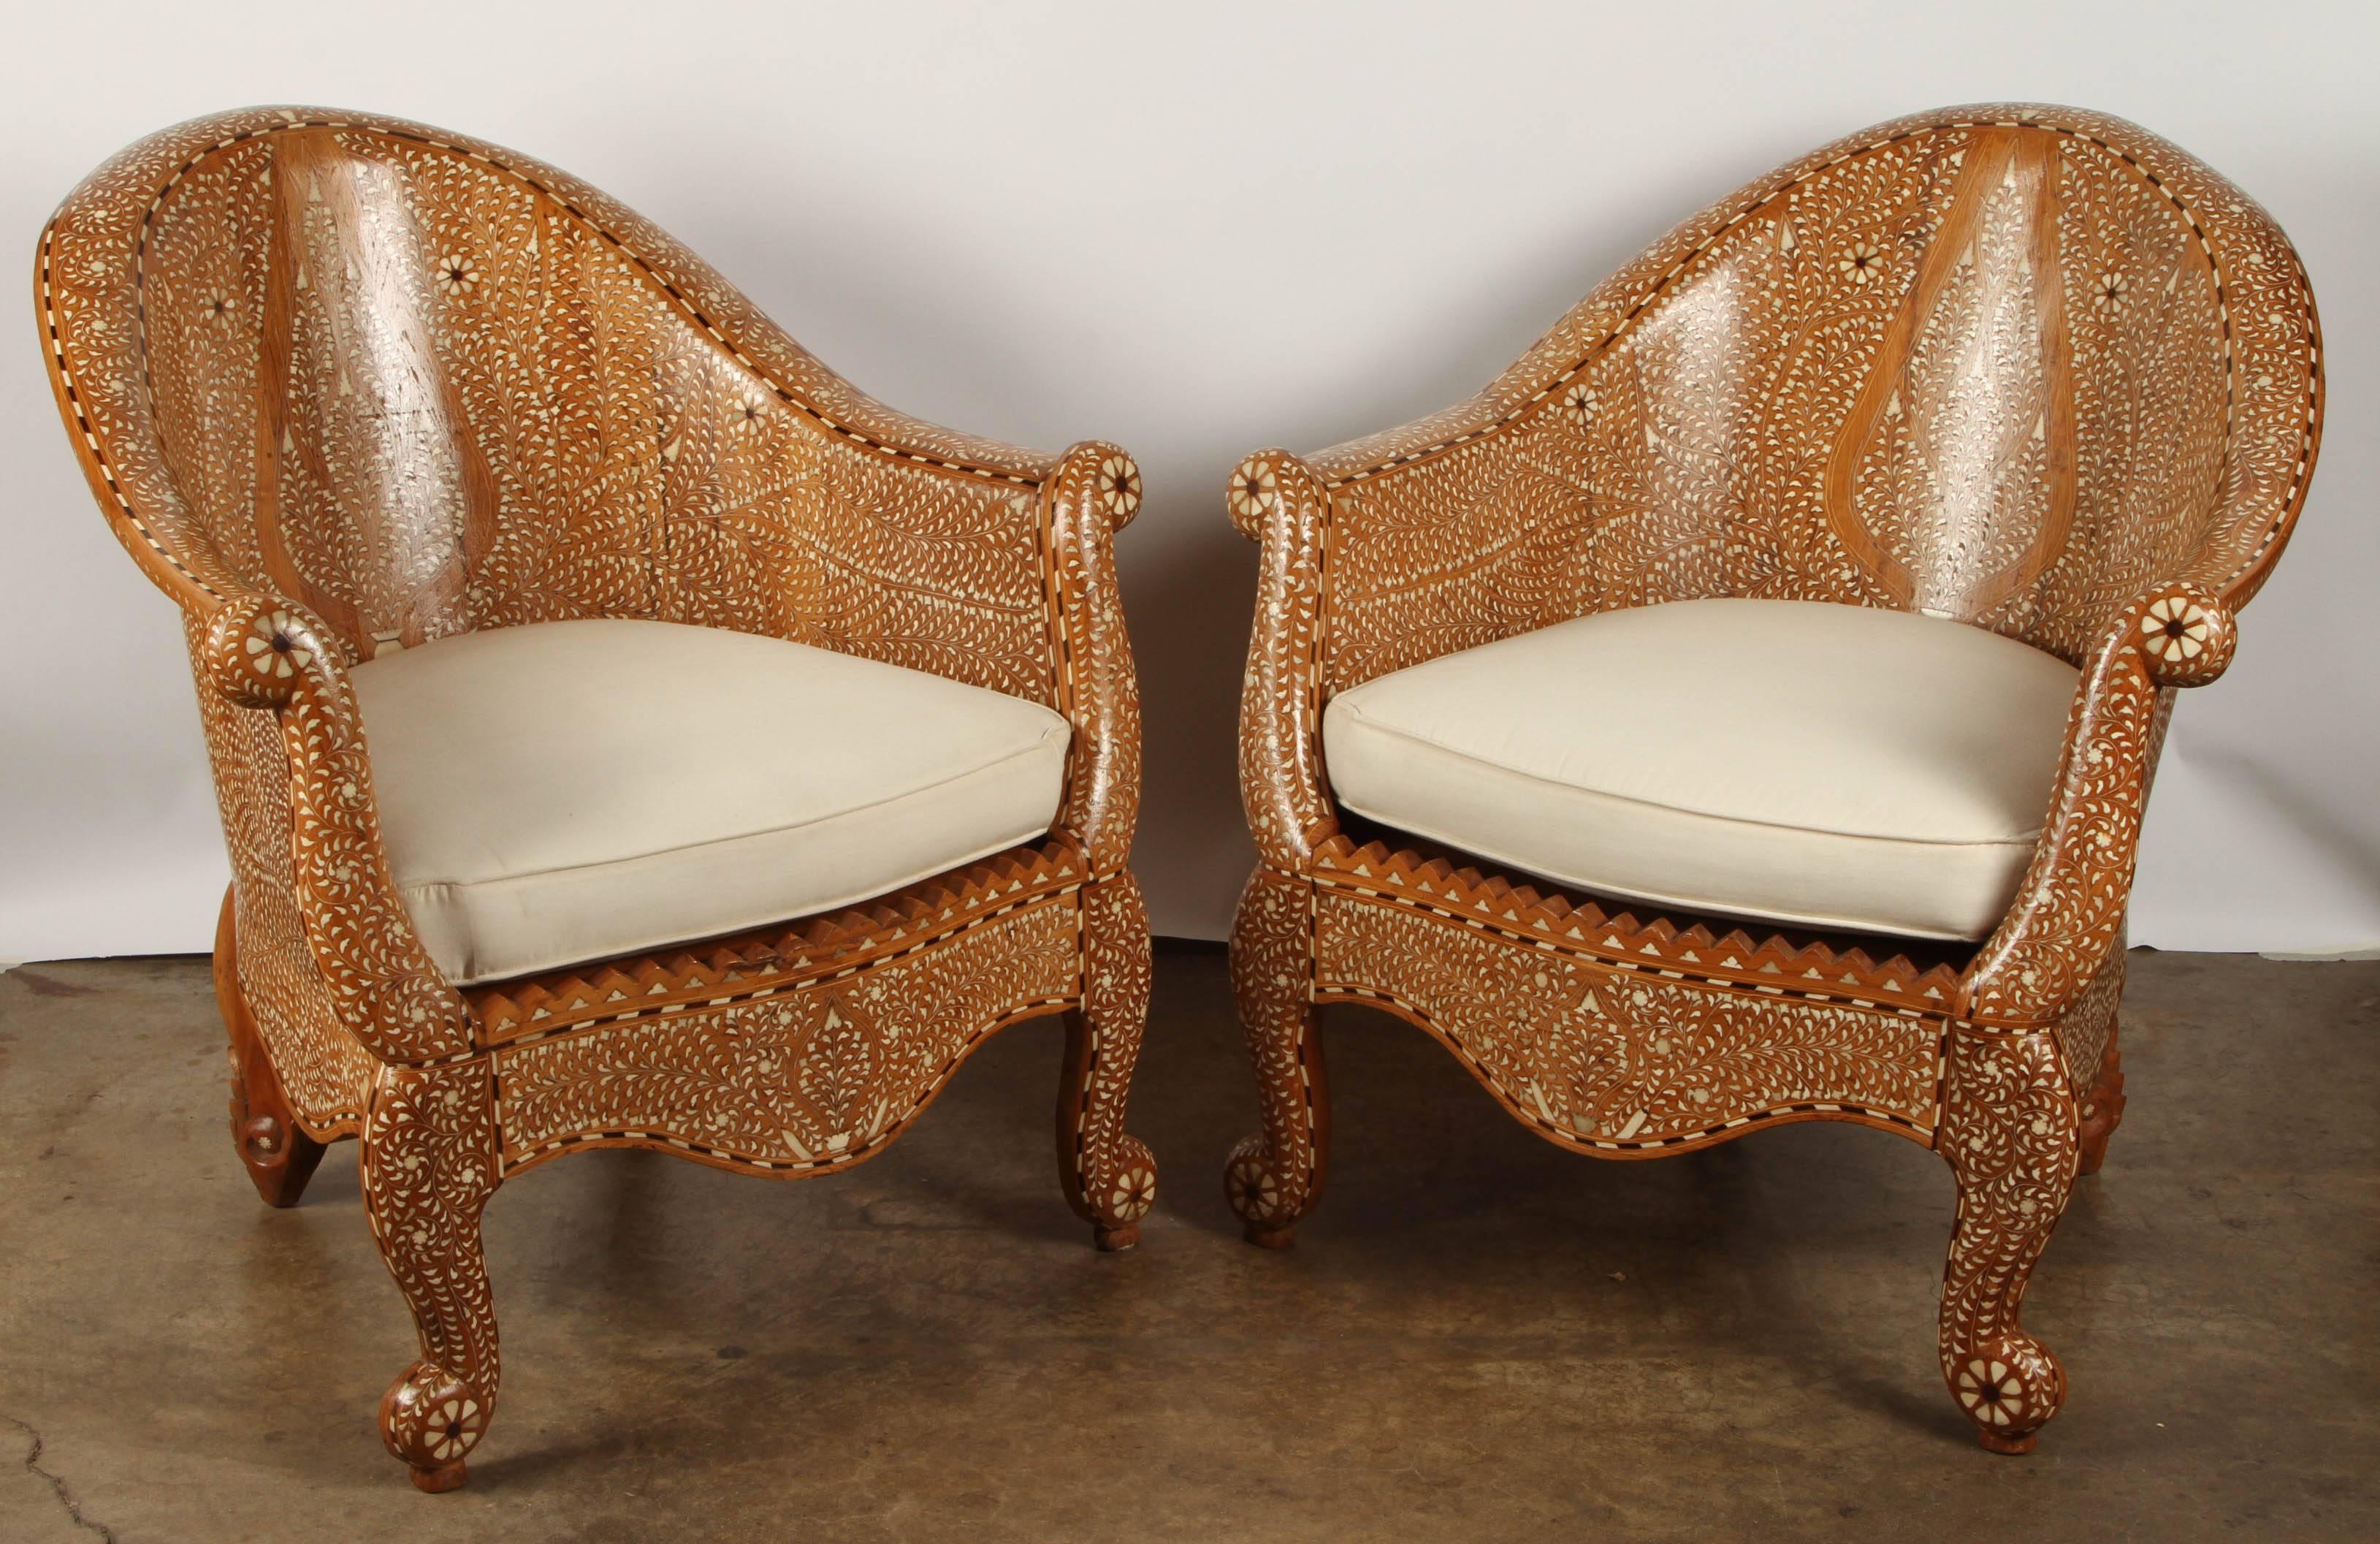 This armchair is made in teak with bone, and is heavily inlaid with depictions of cypress trees and swirls of leaves and/or petals. The back of the chair sweeps gracefully into the arms in a single piece, and ends in a flower shape.